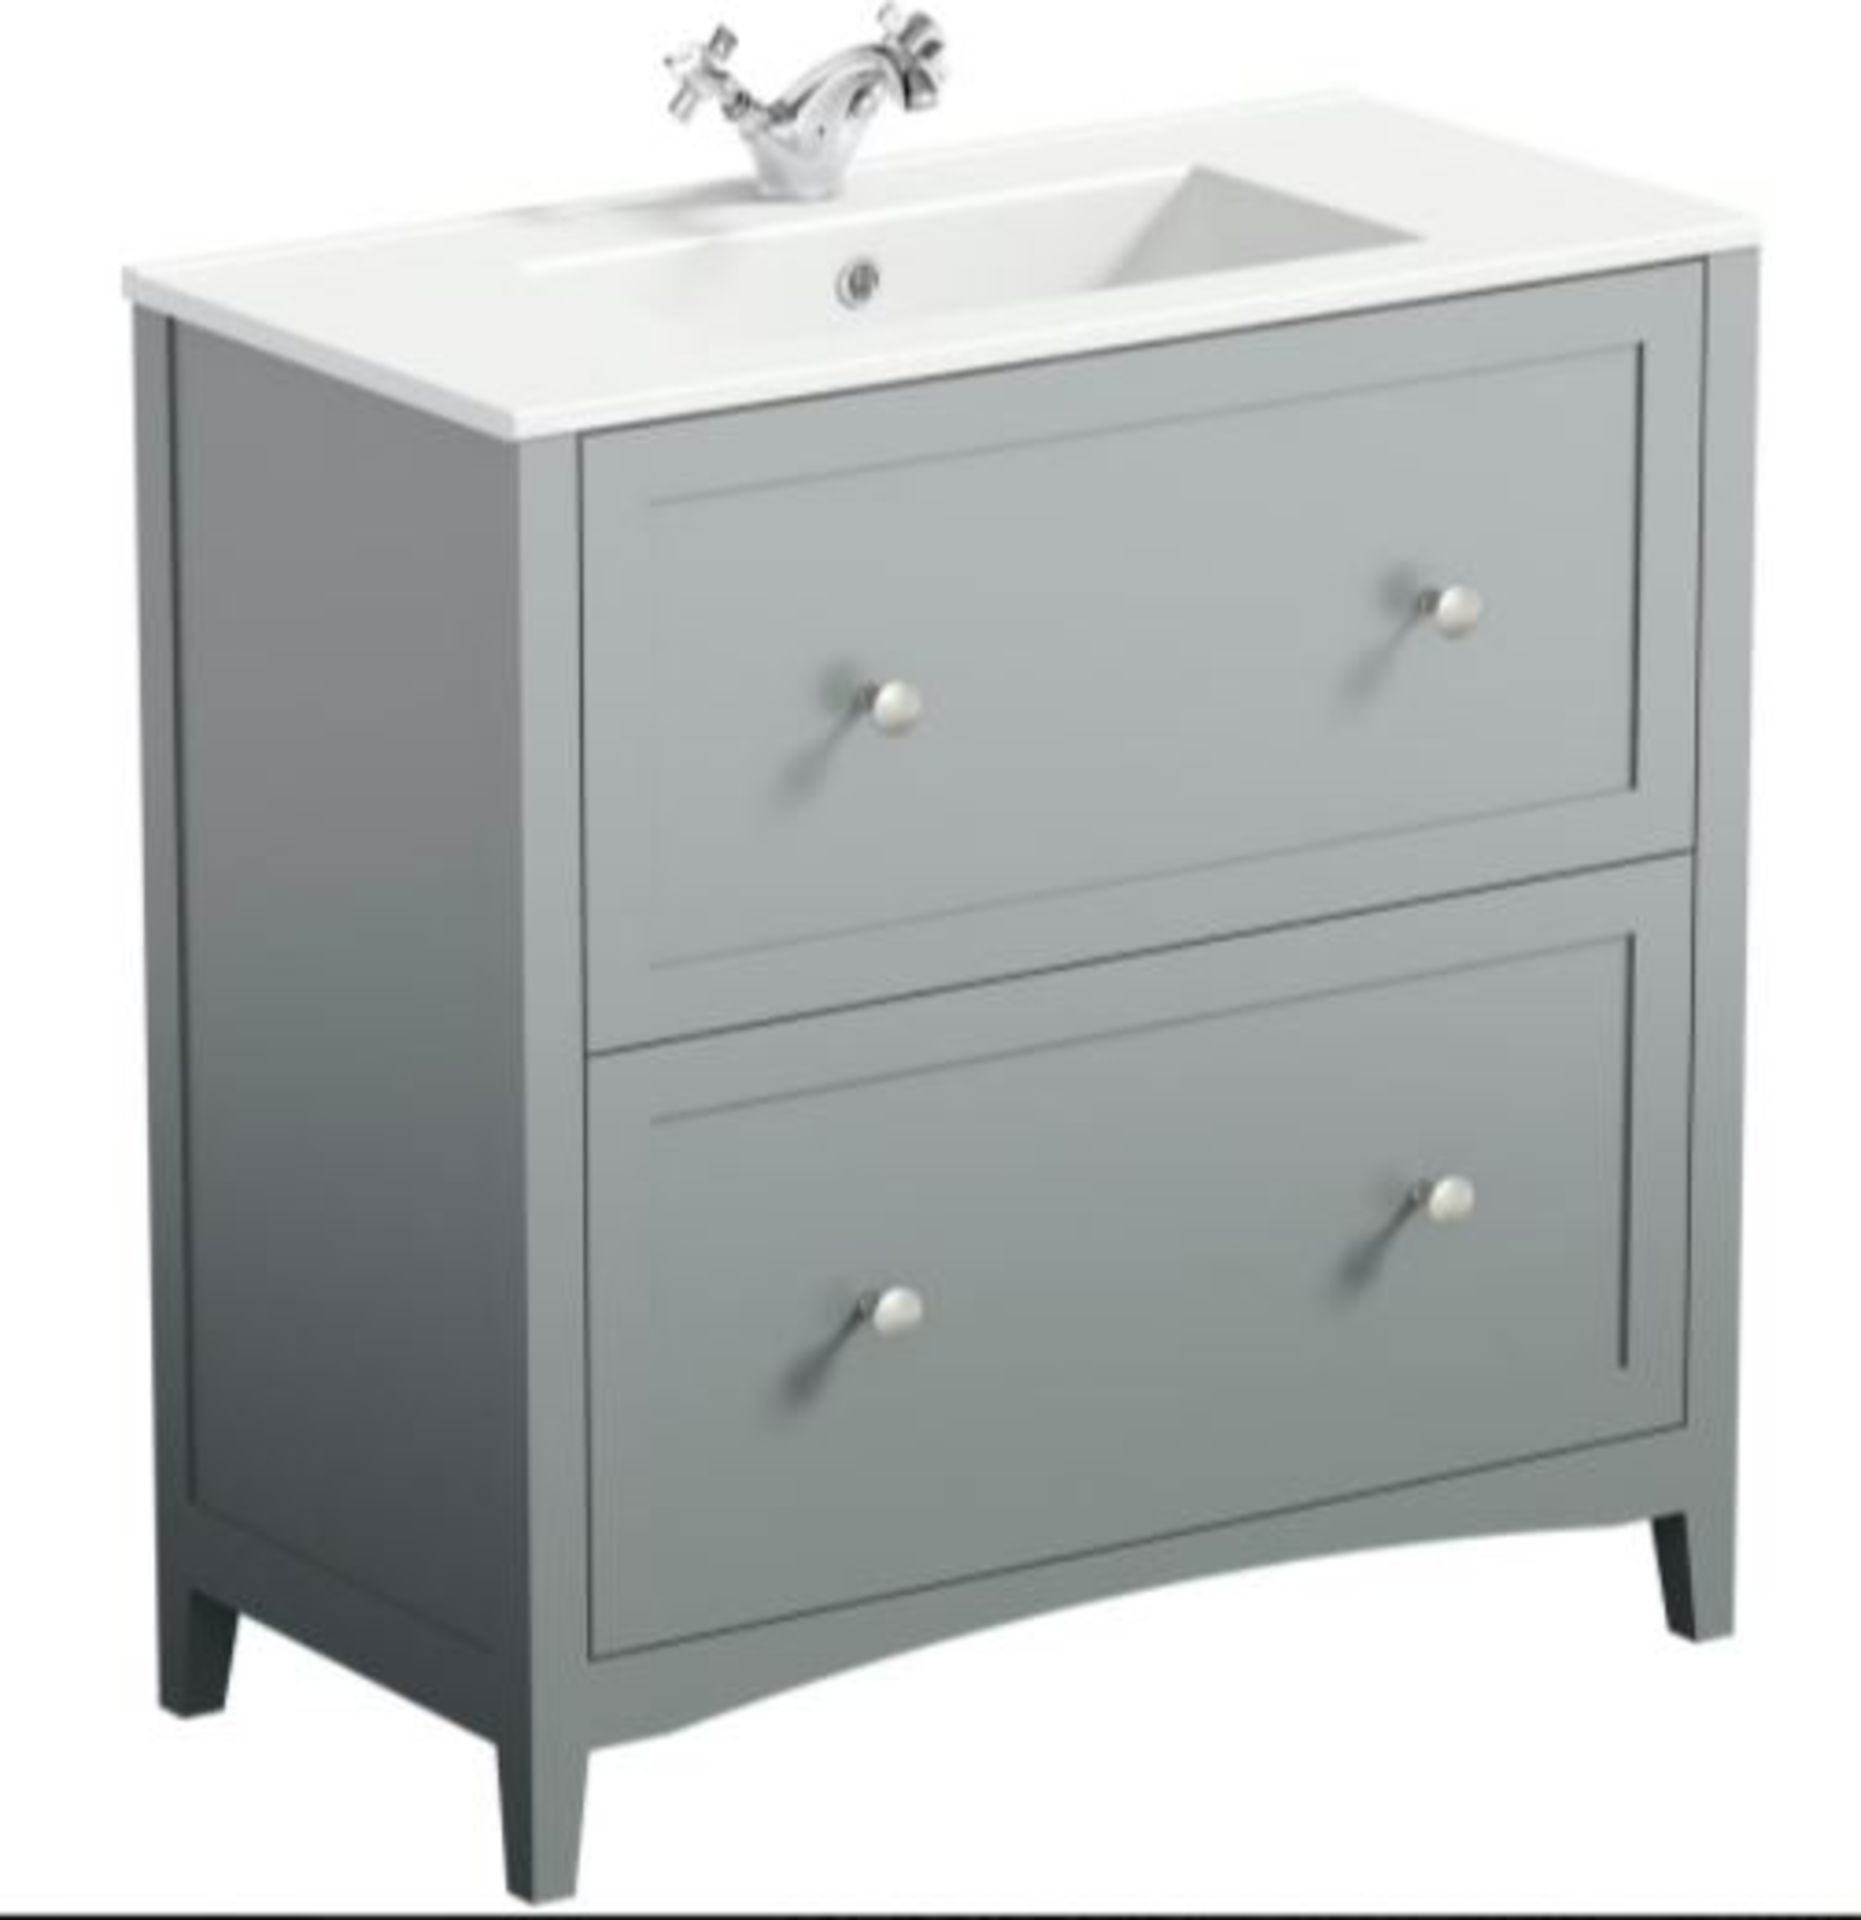 RRP £300. The Bath Co. Camberley floorstanding vanity unit. 800Mm x 390mm. Satin Grey. Unit Only.